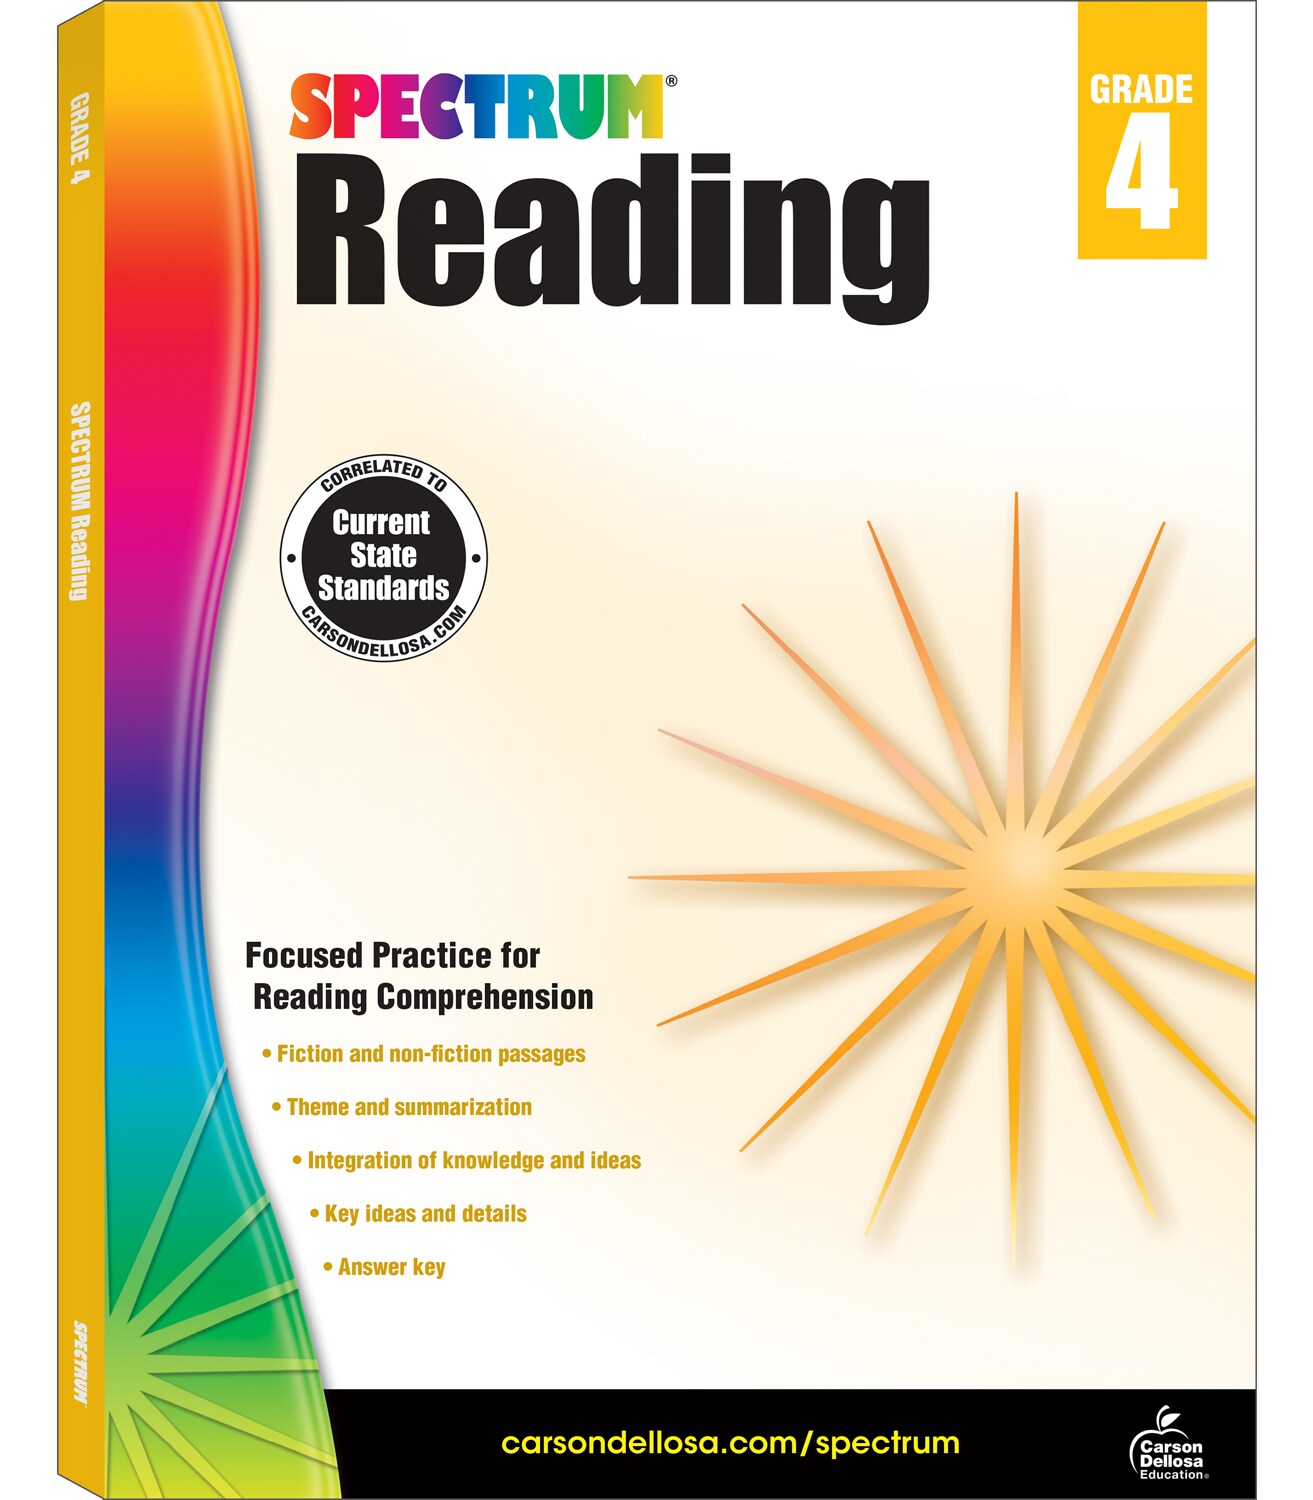 Spectrum Reading Comprehension Grade 4, Ages 9 to 10, 4th Grade Reading Comprehension Workbooks, Nonfiction and Fiction Passages, Summarizing Stories and Identifying Themes - 174 Pages